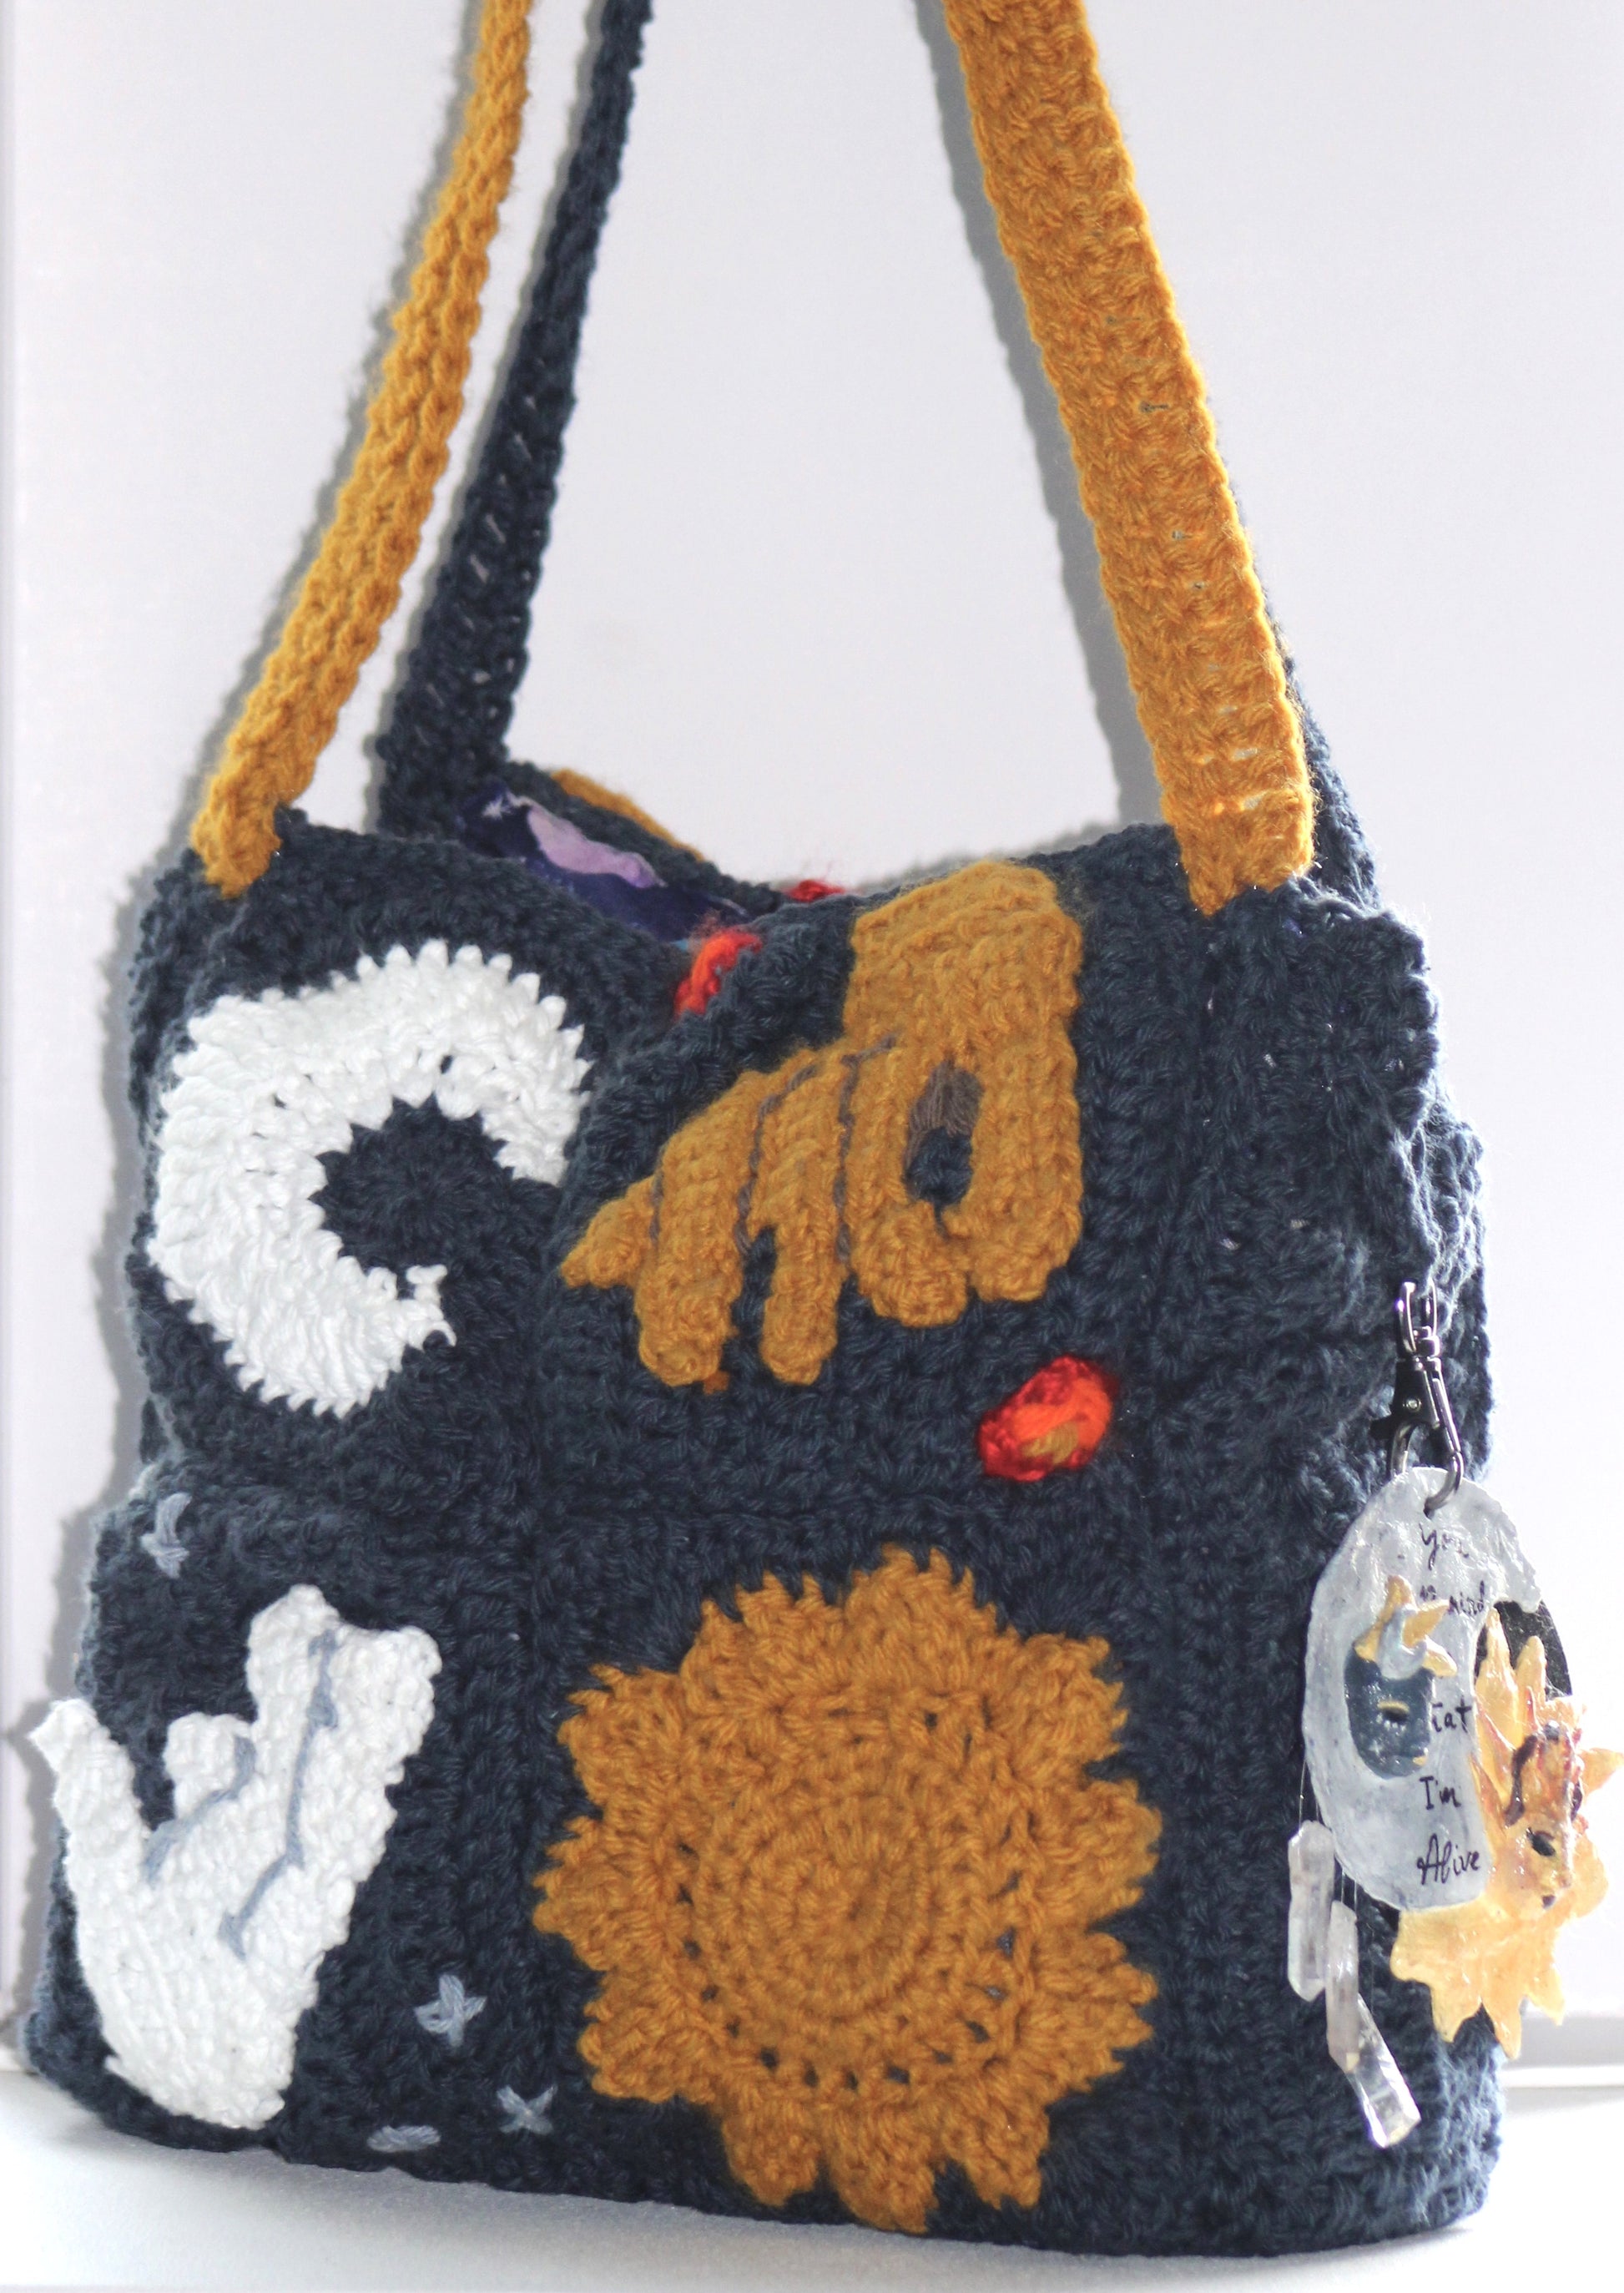 Front view of navy blue crochet purse made up of four granny squares. The top left square has a white crescent moon, the top right has a golden hand reaching toward the bottom left, the bottom left has a white hand reaching toward the top right, and the bottom right has a golden sun. There are also three stars in the two corners above and below the white hand granny square and one flame in the two corners above and below the golden hand granny square. This handbag has two straps, one blue and one golden.